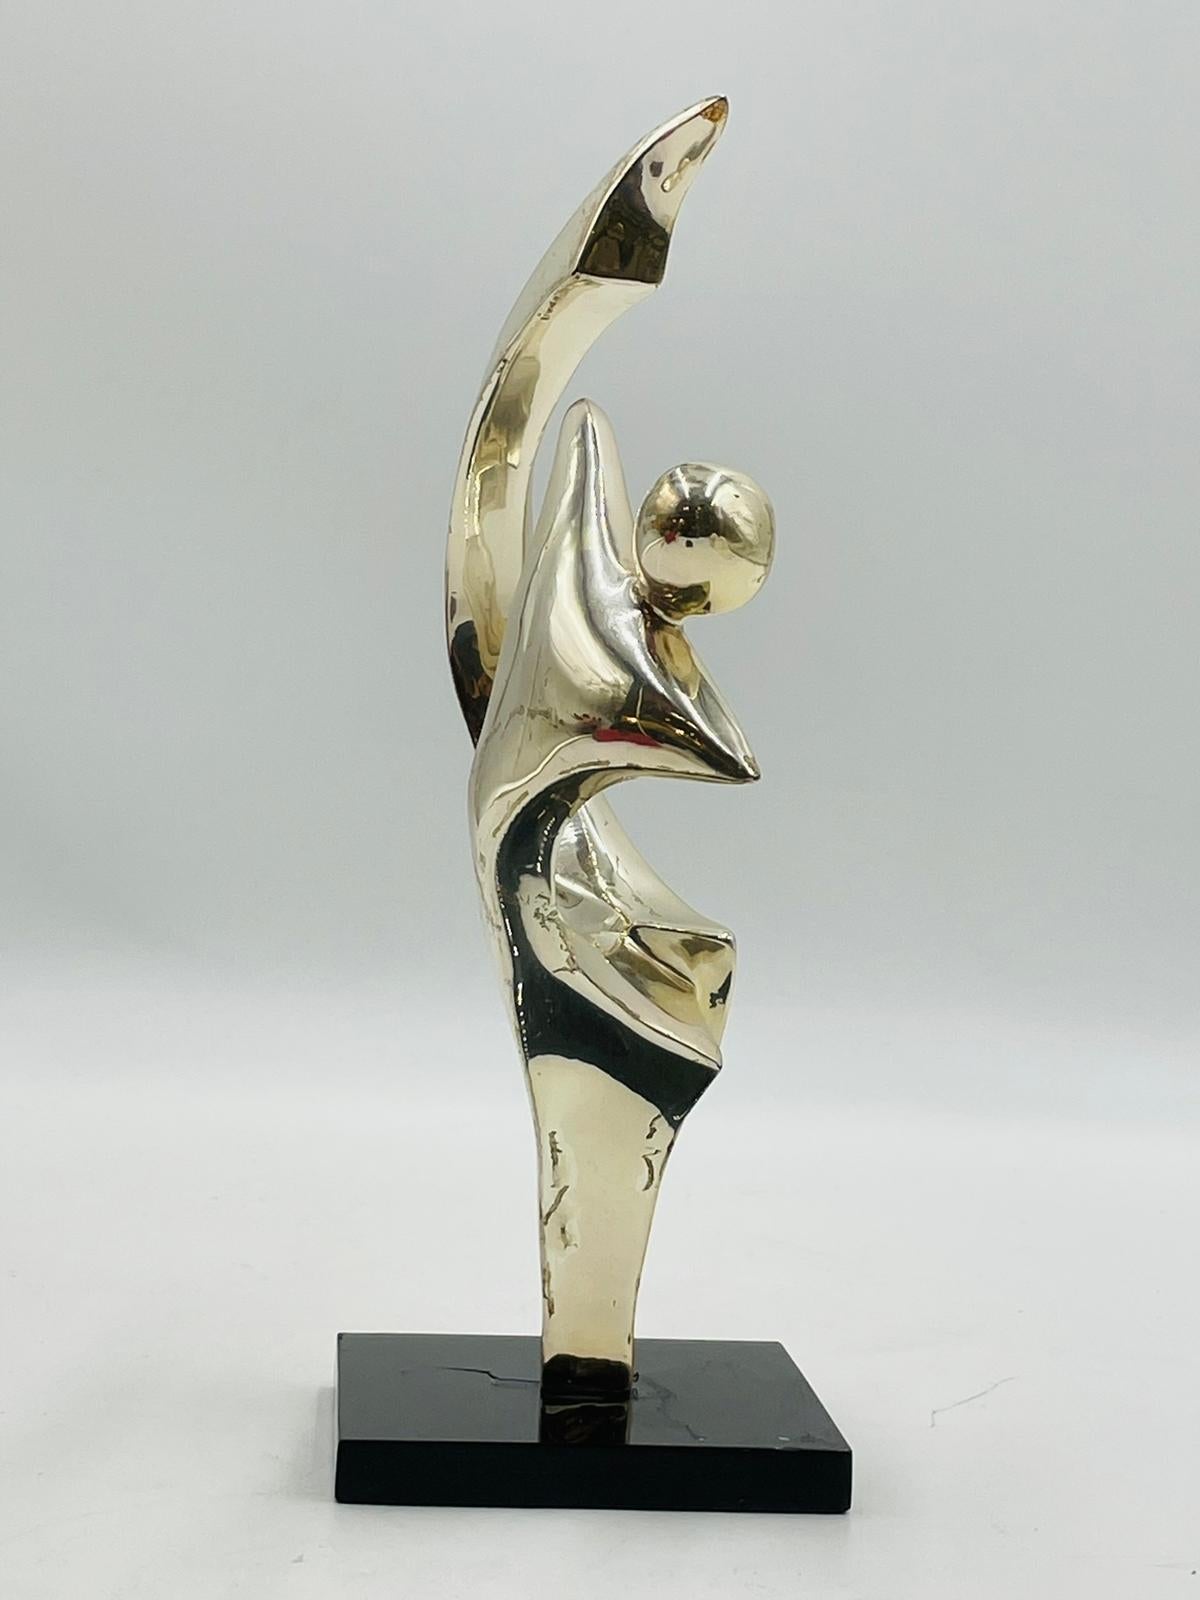 Nickel Plated Bronze Sculpture by Kieff Grediaga #4/10 Signed In Good Condition For Sale In Los Angeles, CA